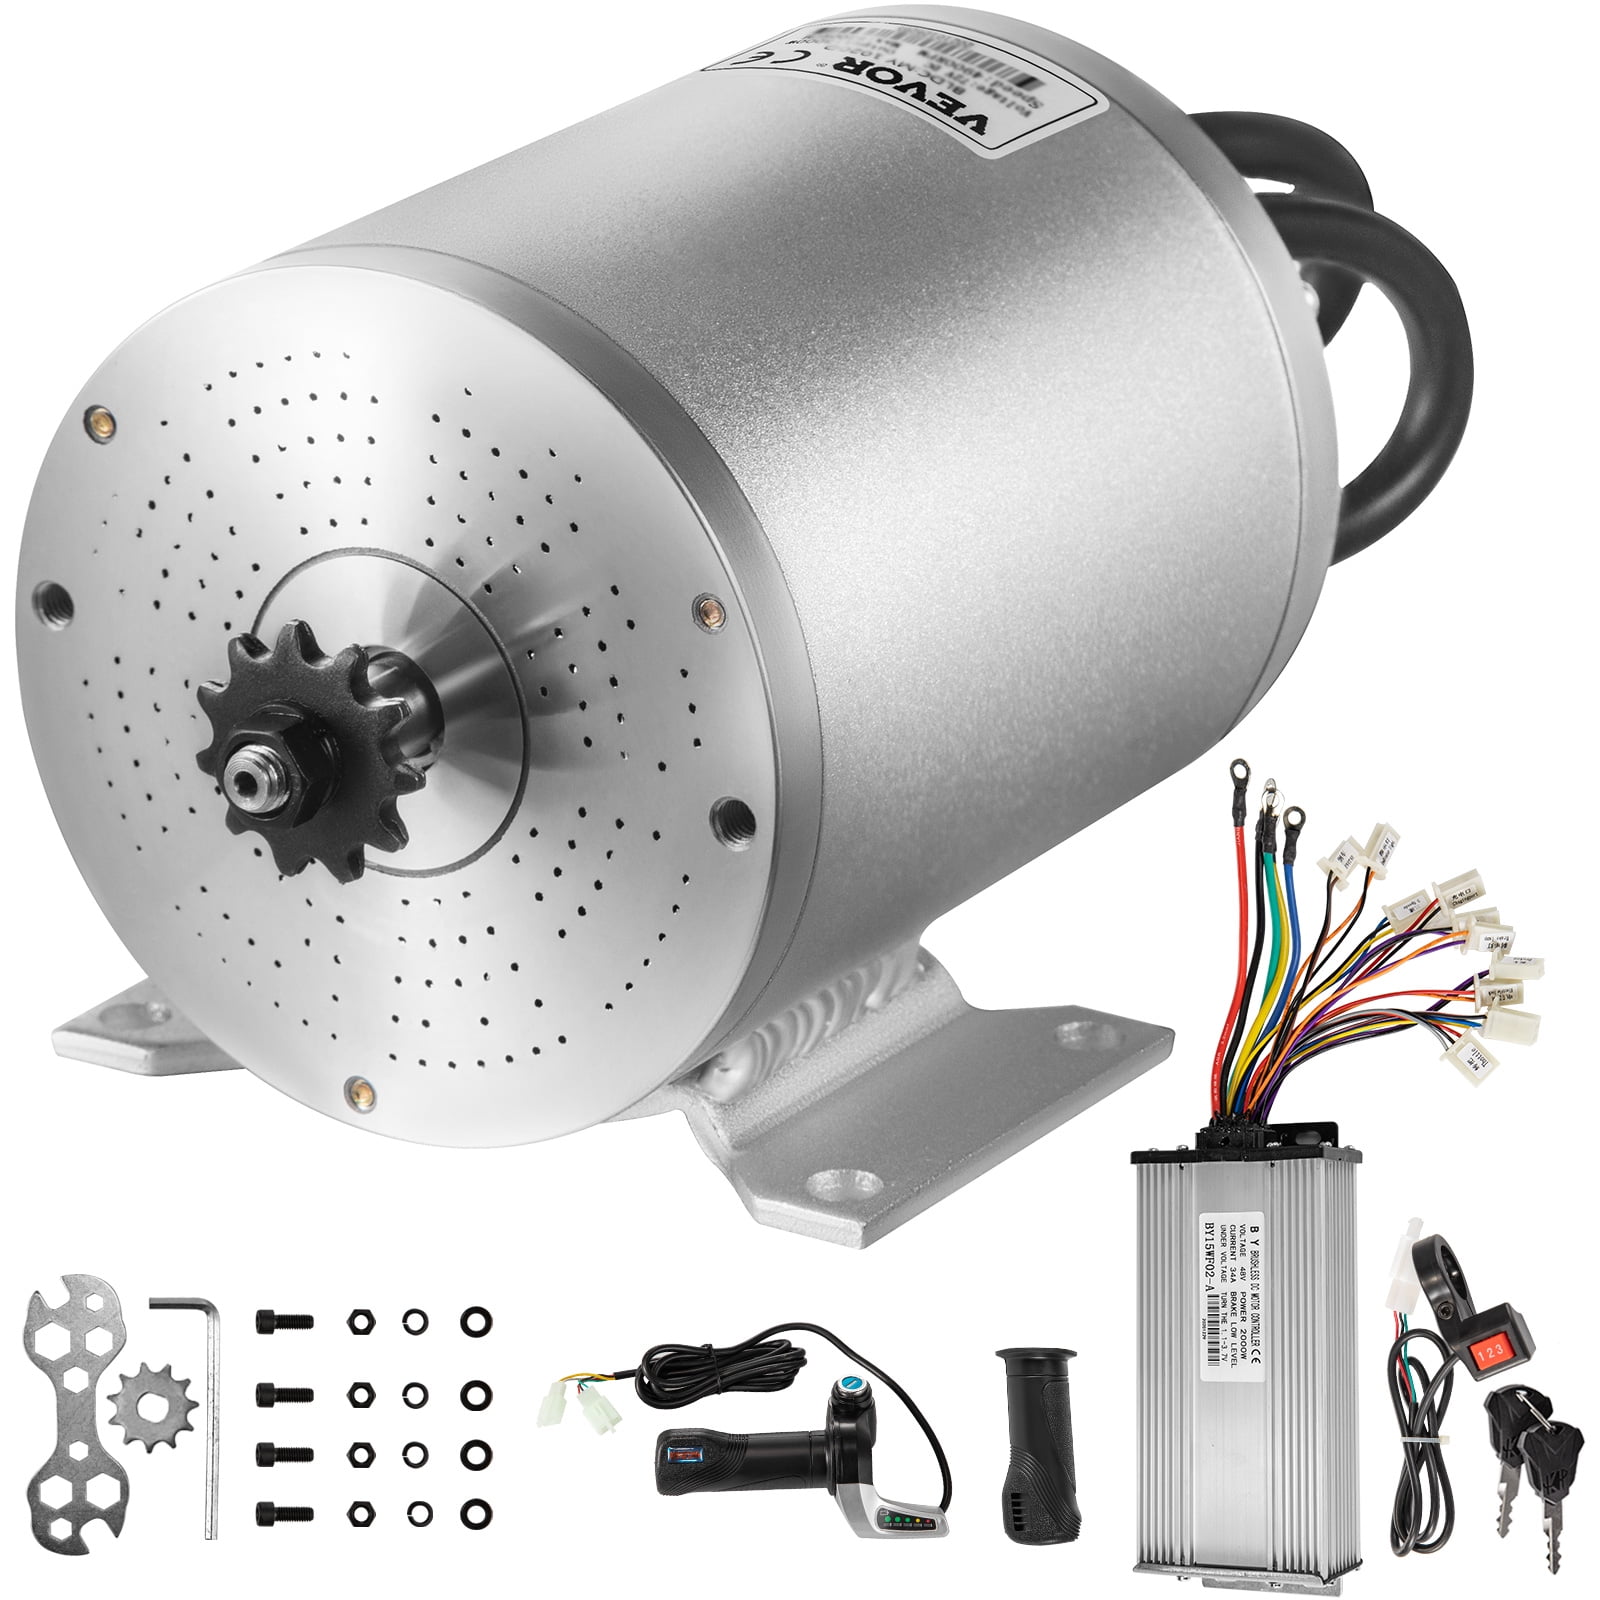 3 Speed 48V 1800W Electric Brushless DC Motor Controller for ATV Quad Scooter US 